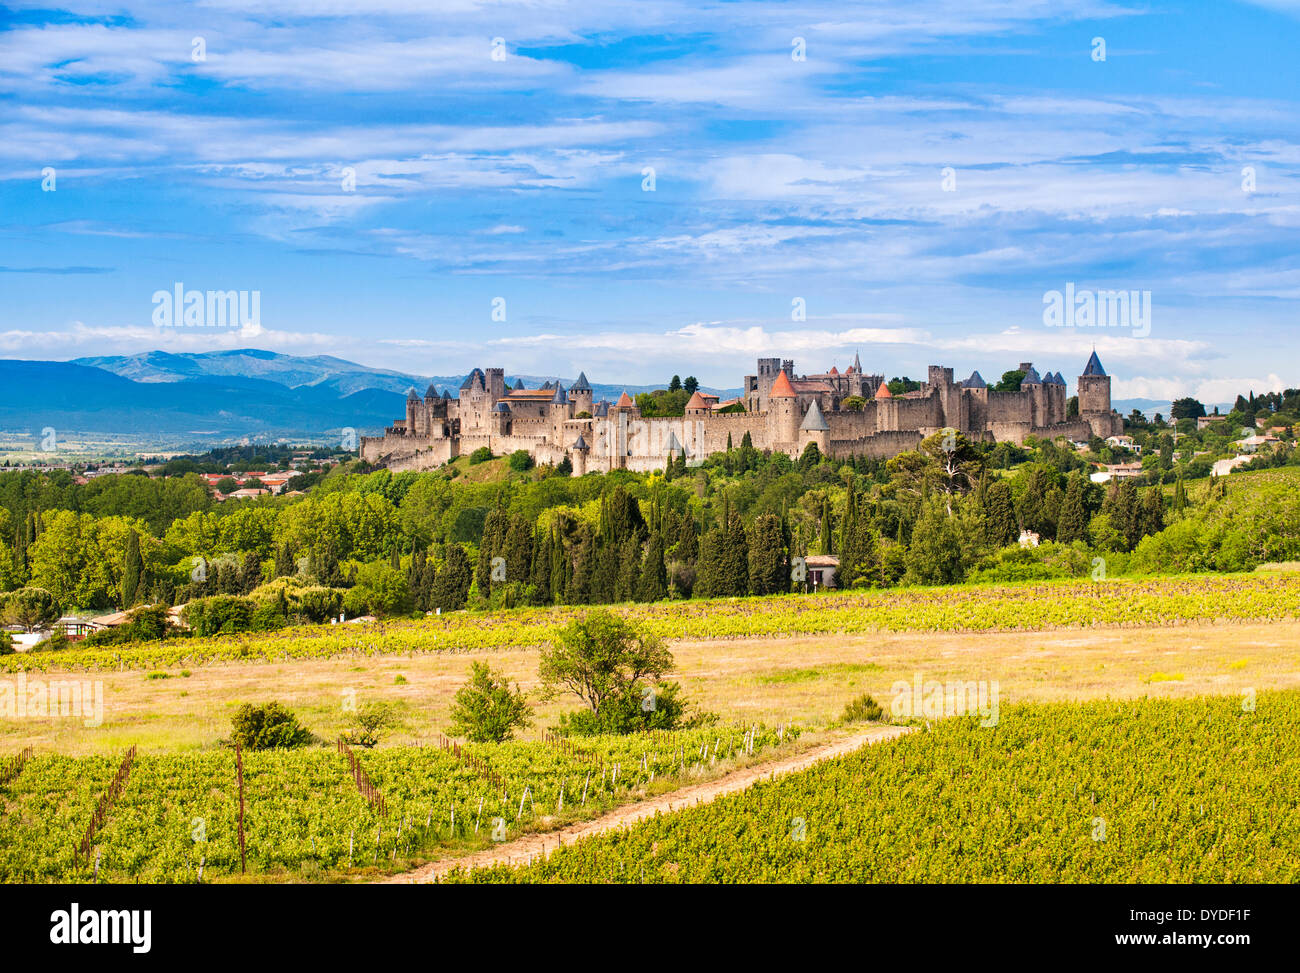 The fortified city of Carcassonne. Stock Photo